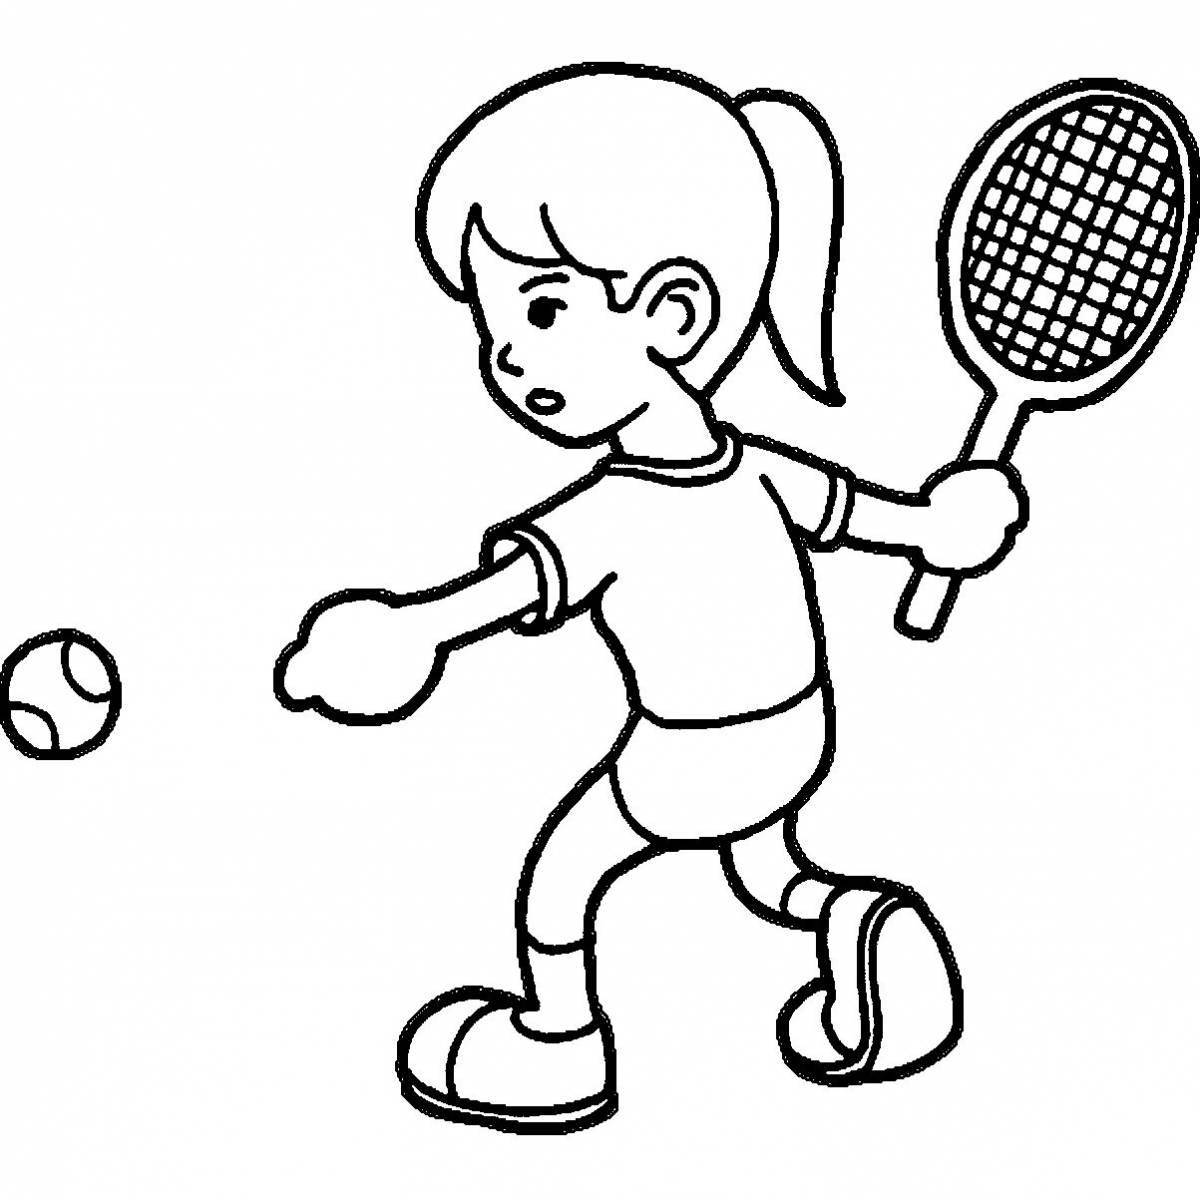 Great sports coloring book for 3-4 year olds